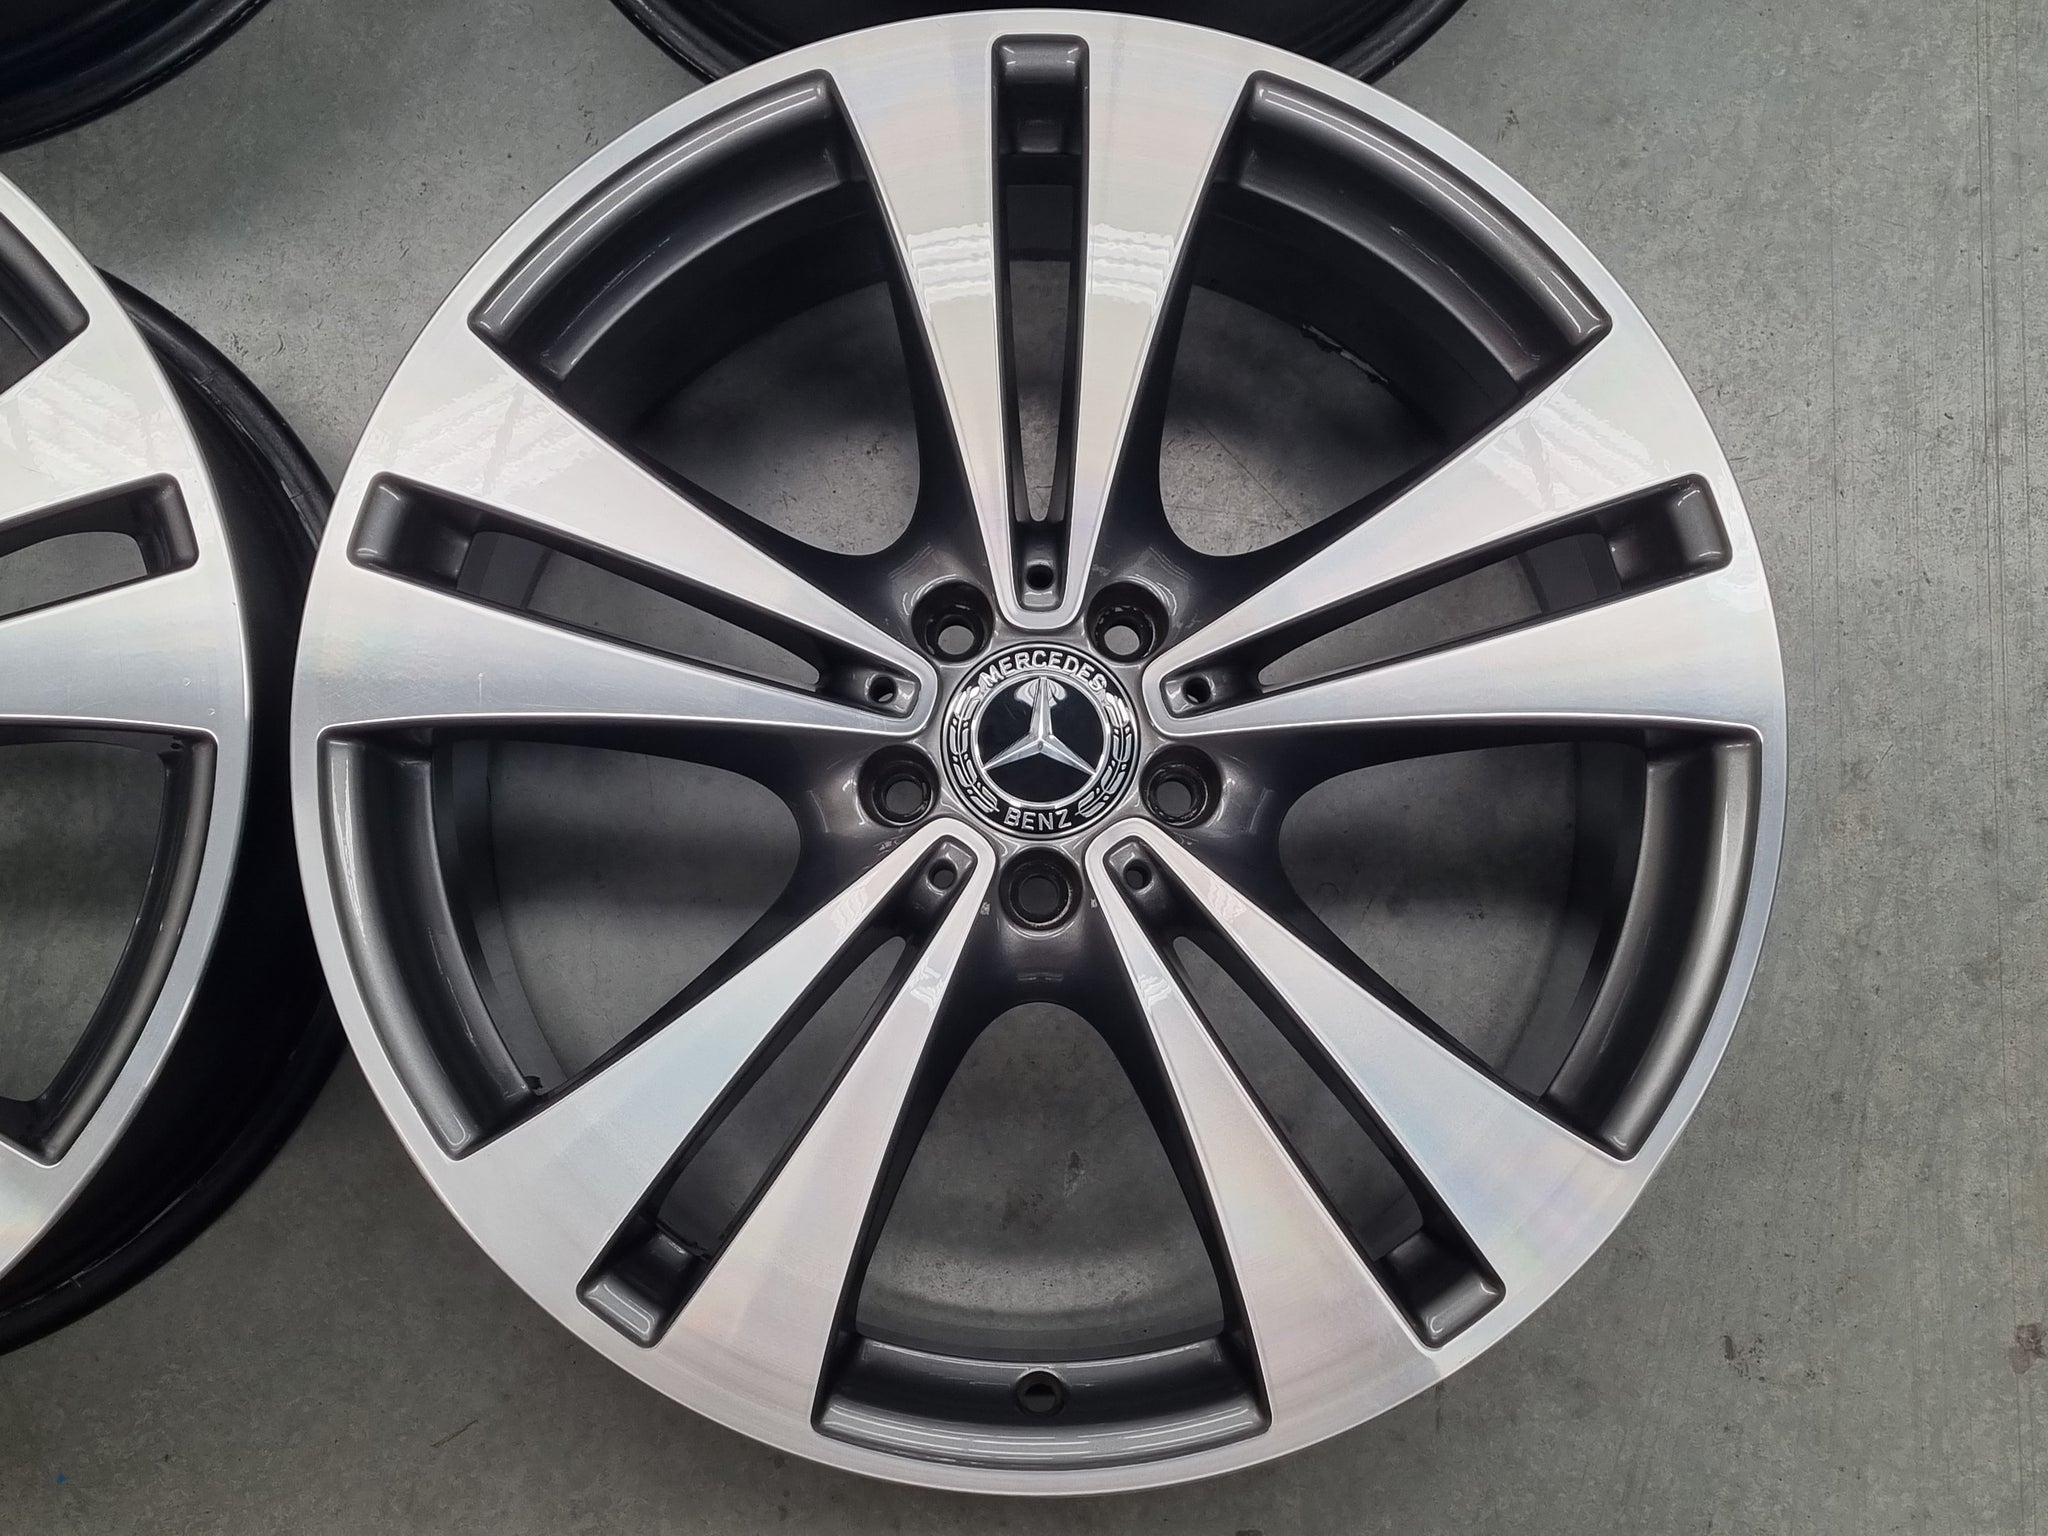 Load image into Gallery viewer, Genuine Mercedes Benz GLC250 X253 20 Inch Wheels Set of 4
